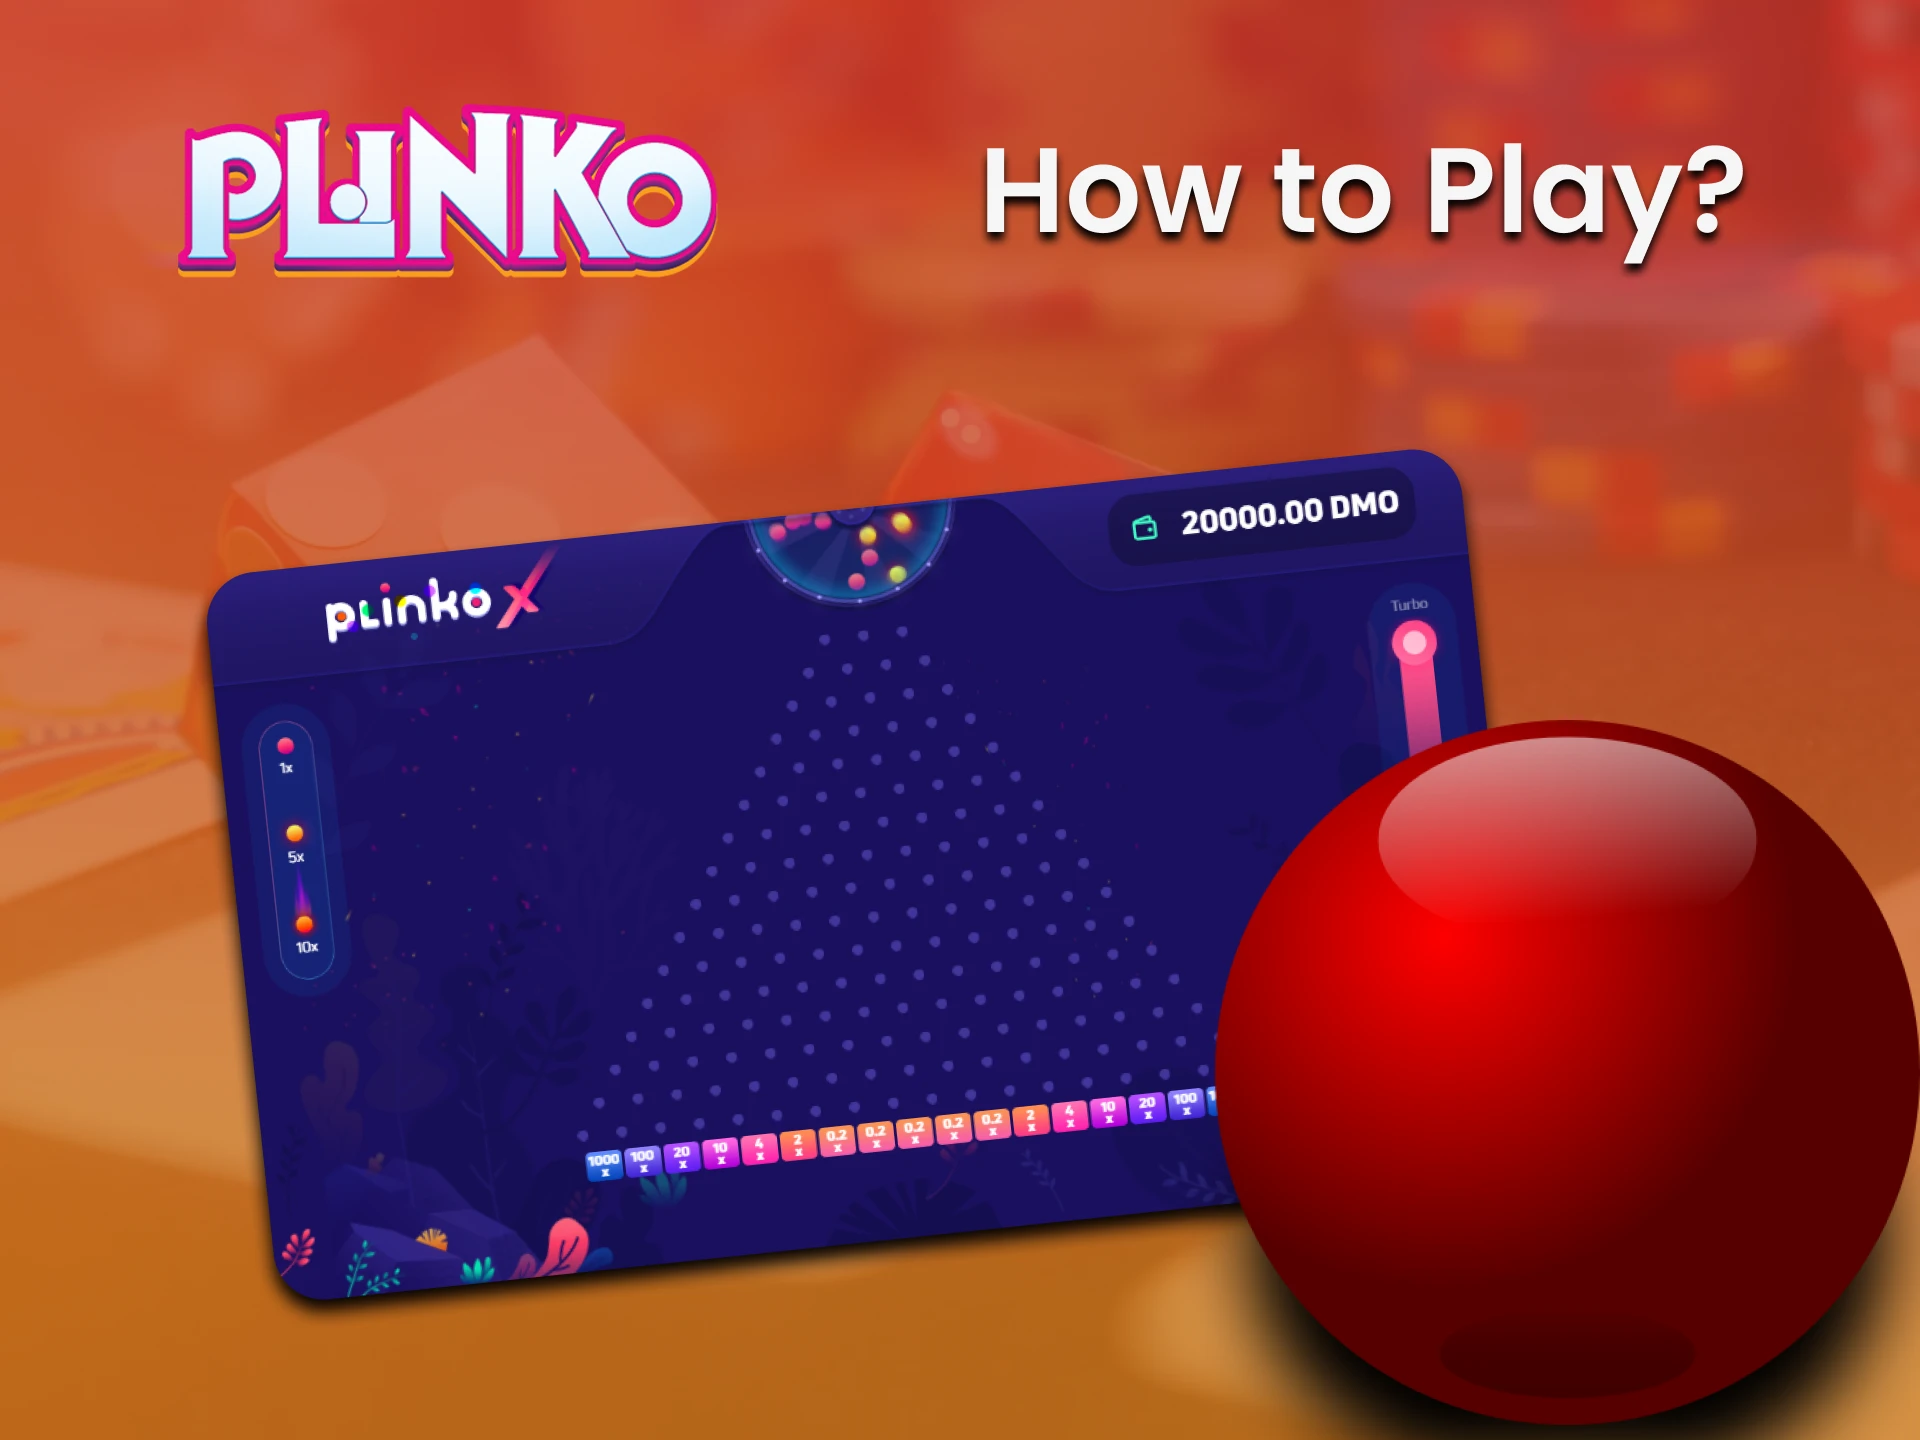 Learn the rules to win at Plinko.